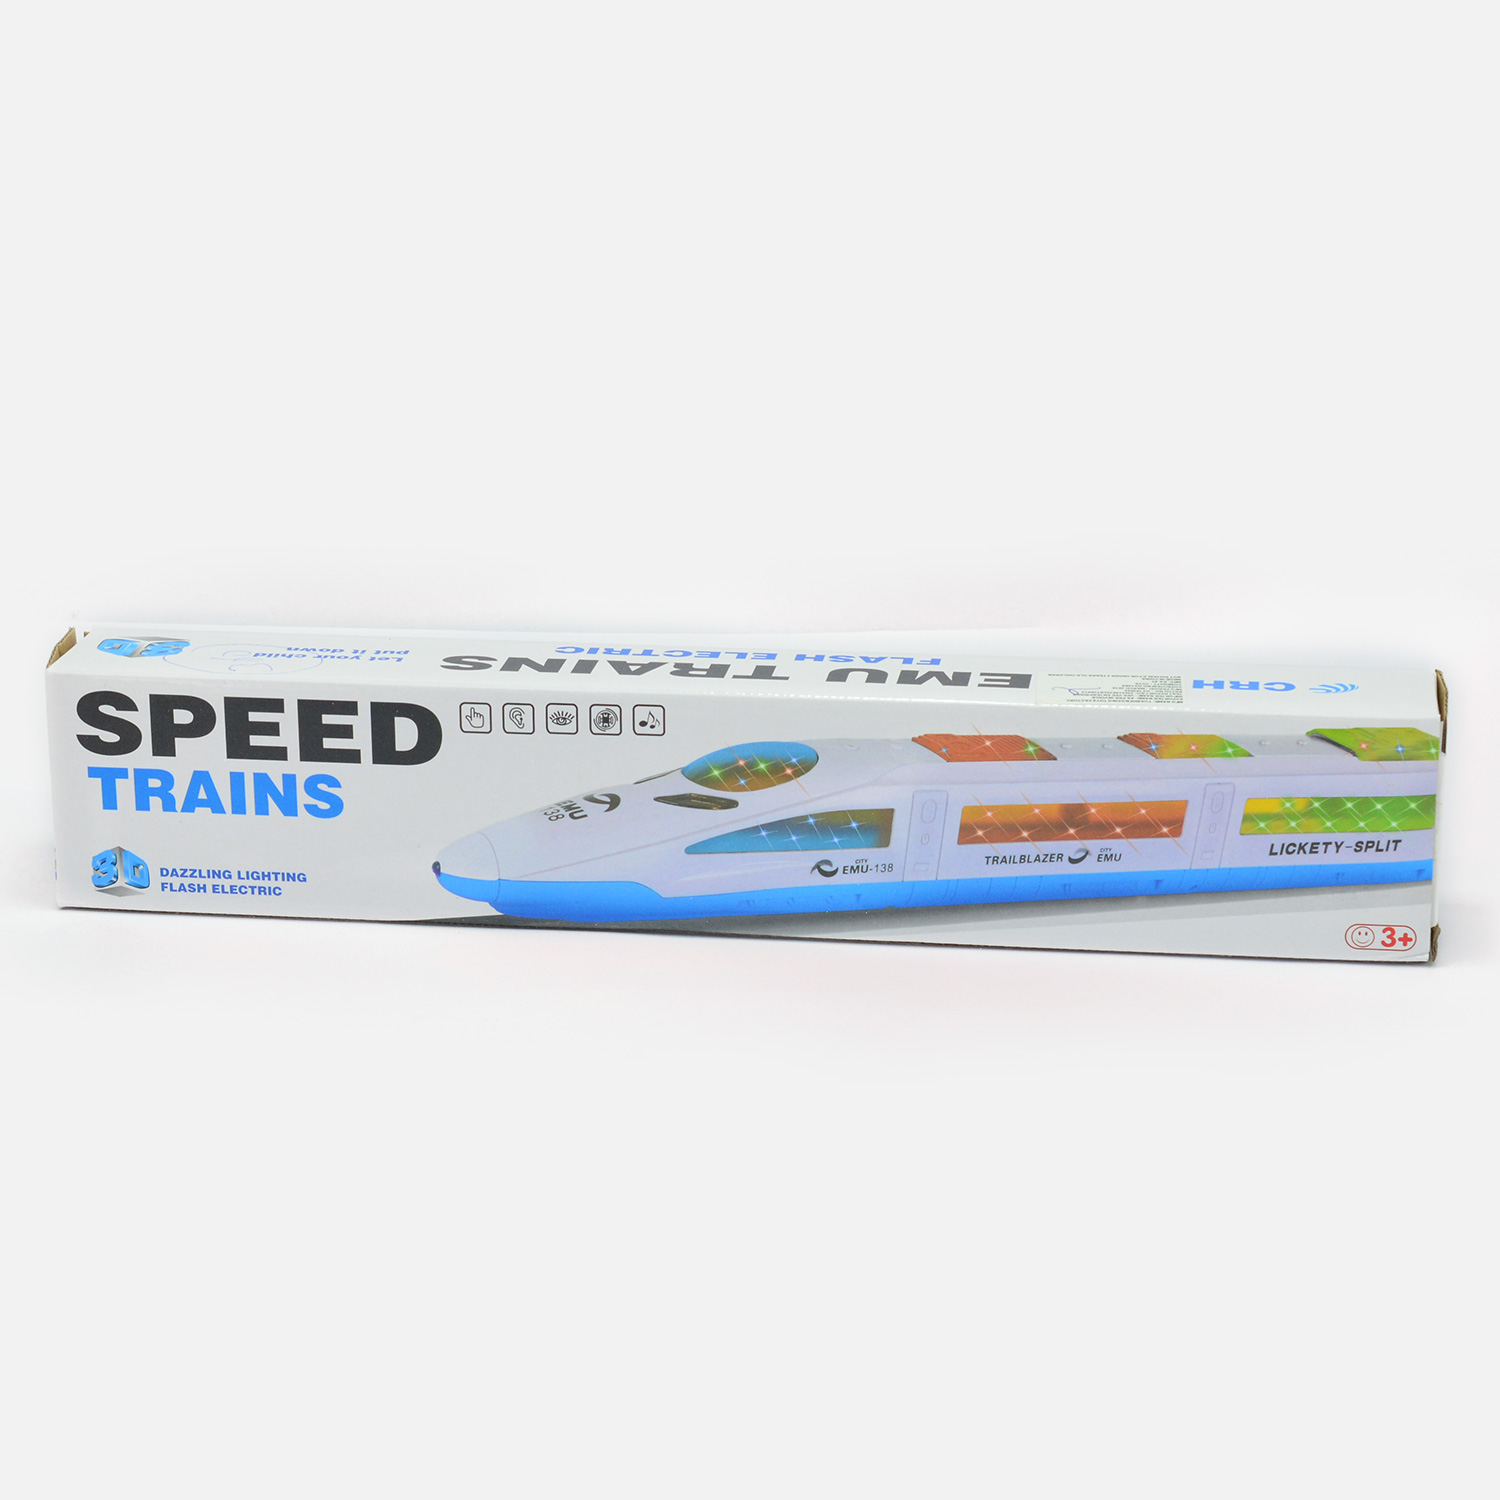 Speed Bullet Train Game Toy for Kids